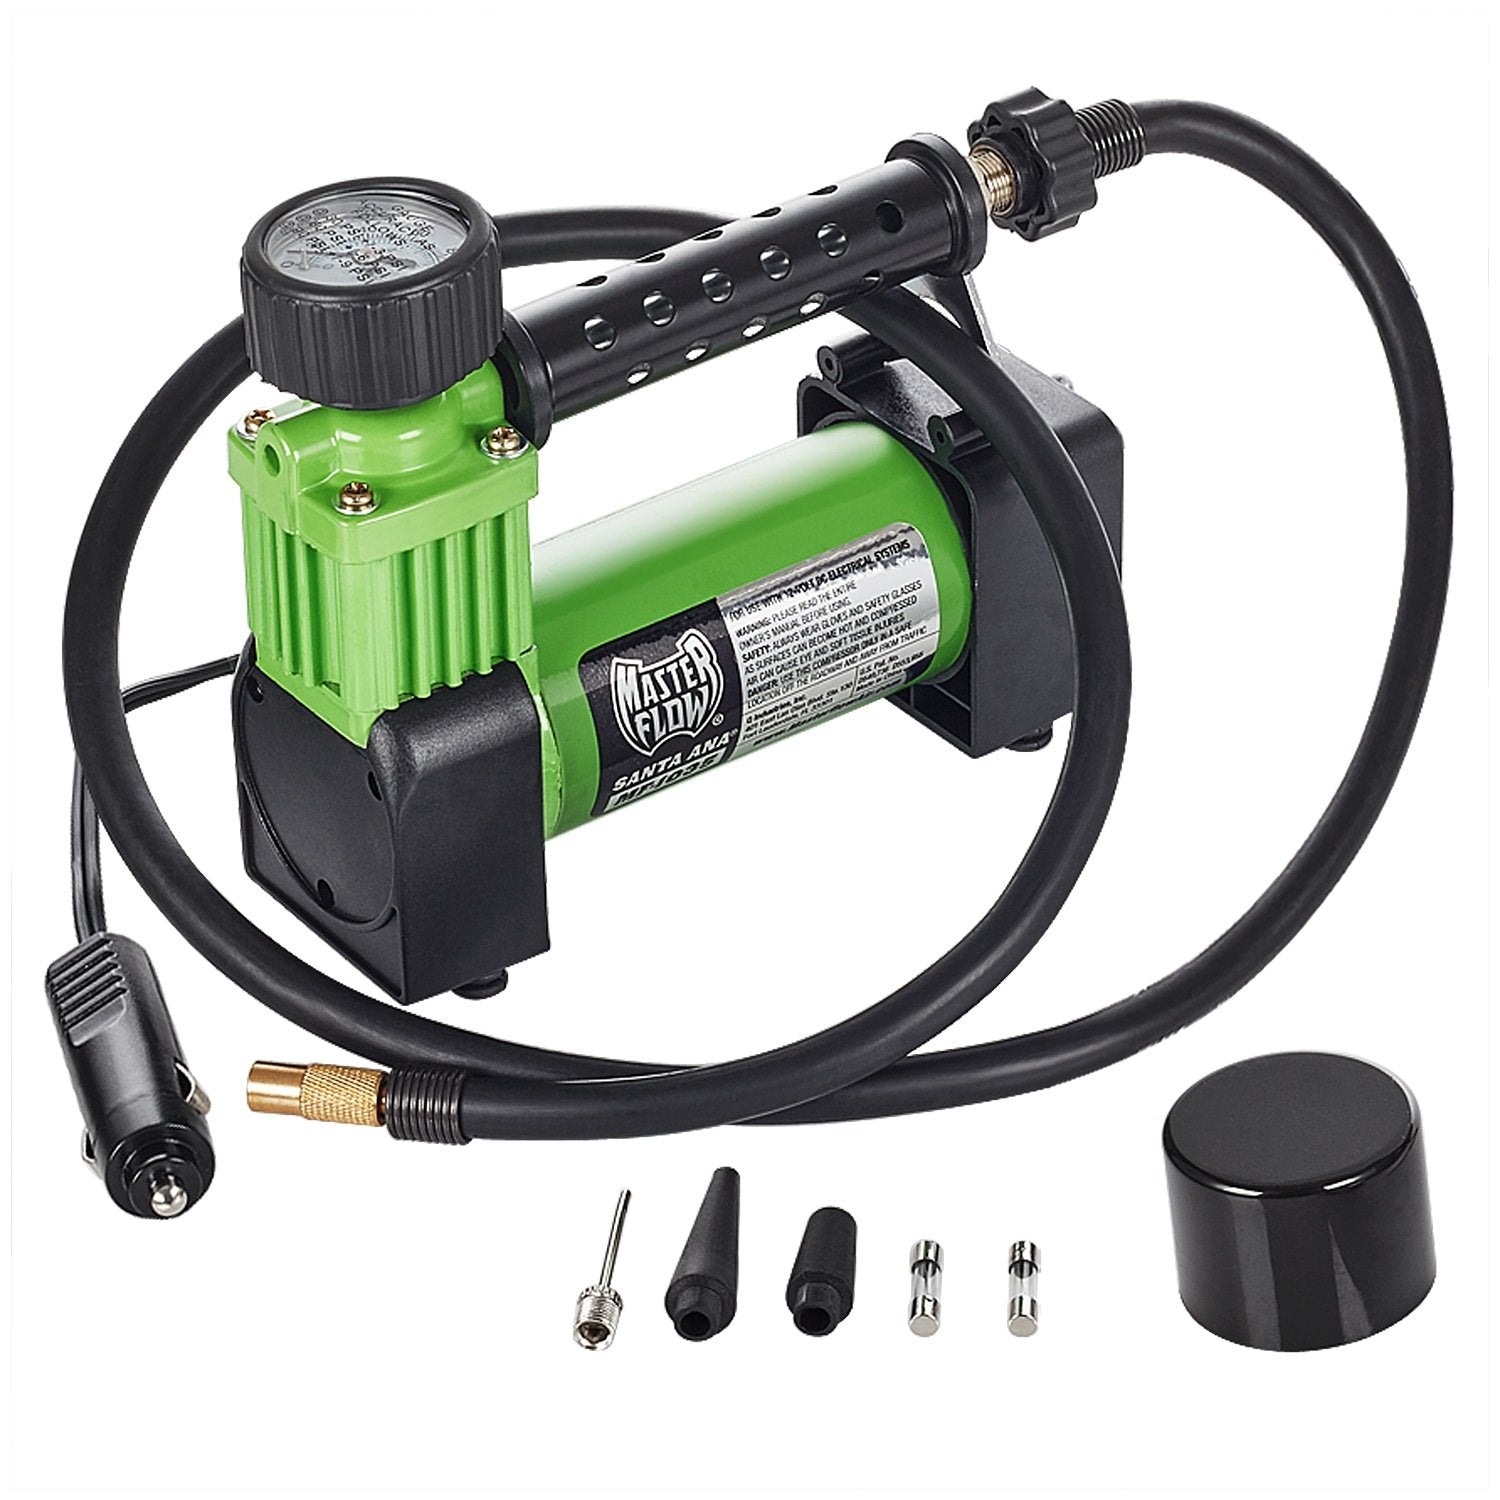 Masterflow MF-1035 Santa Ana air compressor with accessories and hoses featured